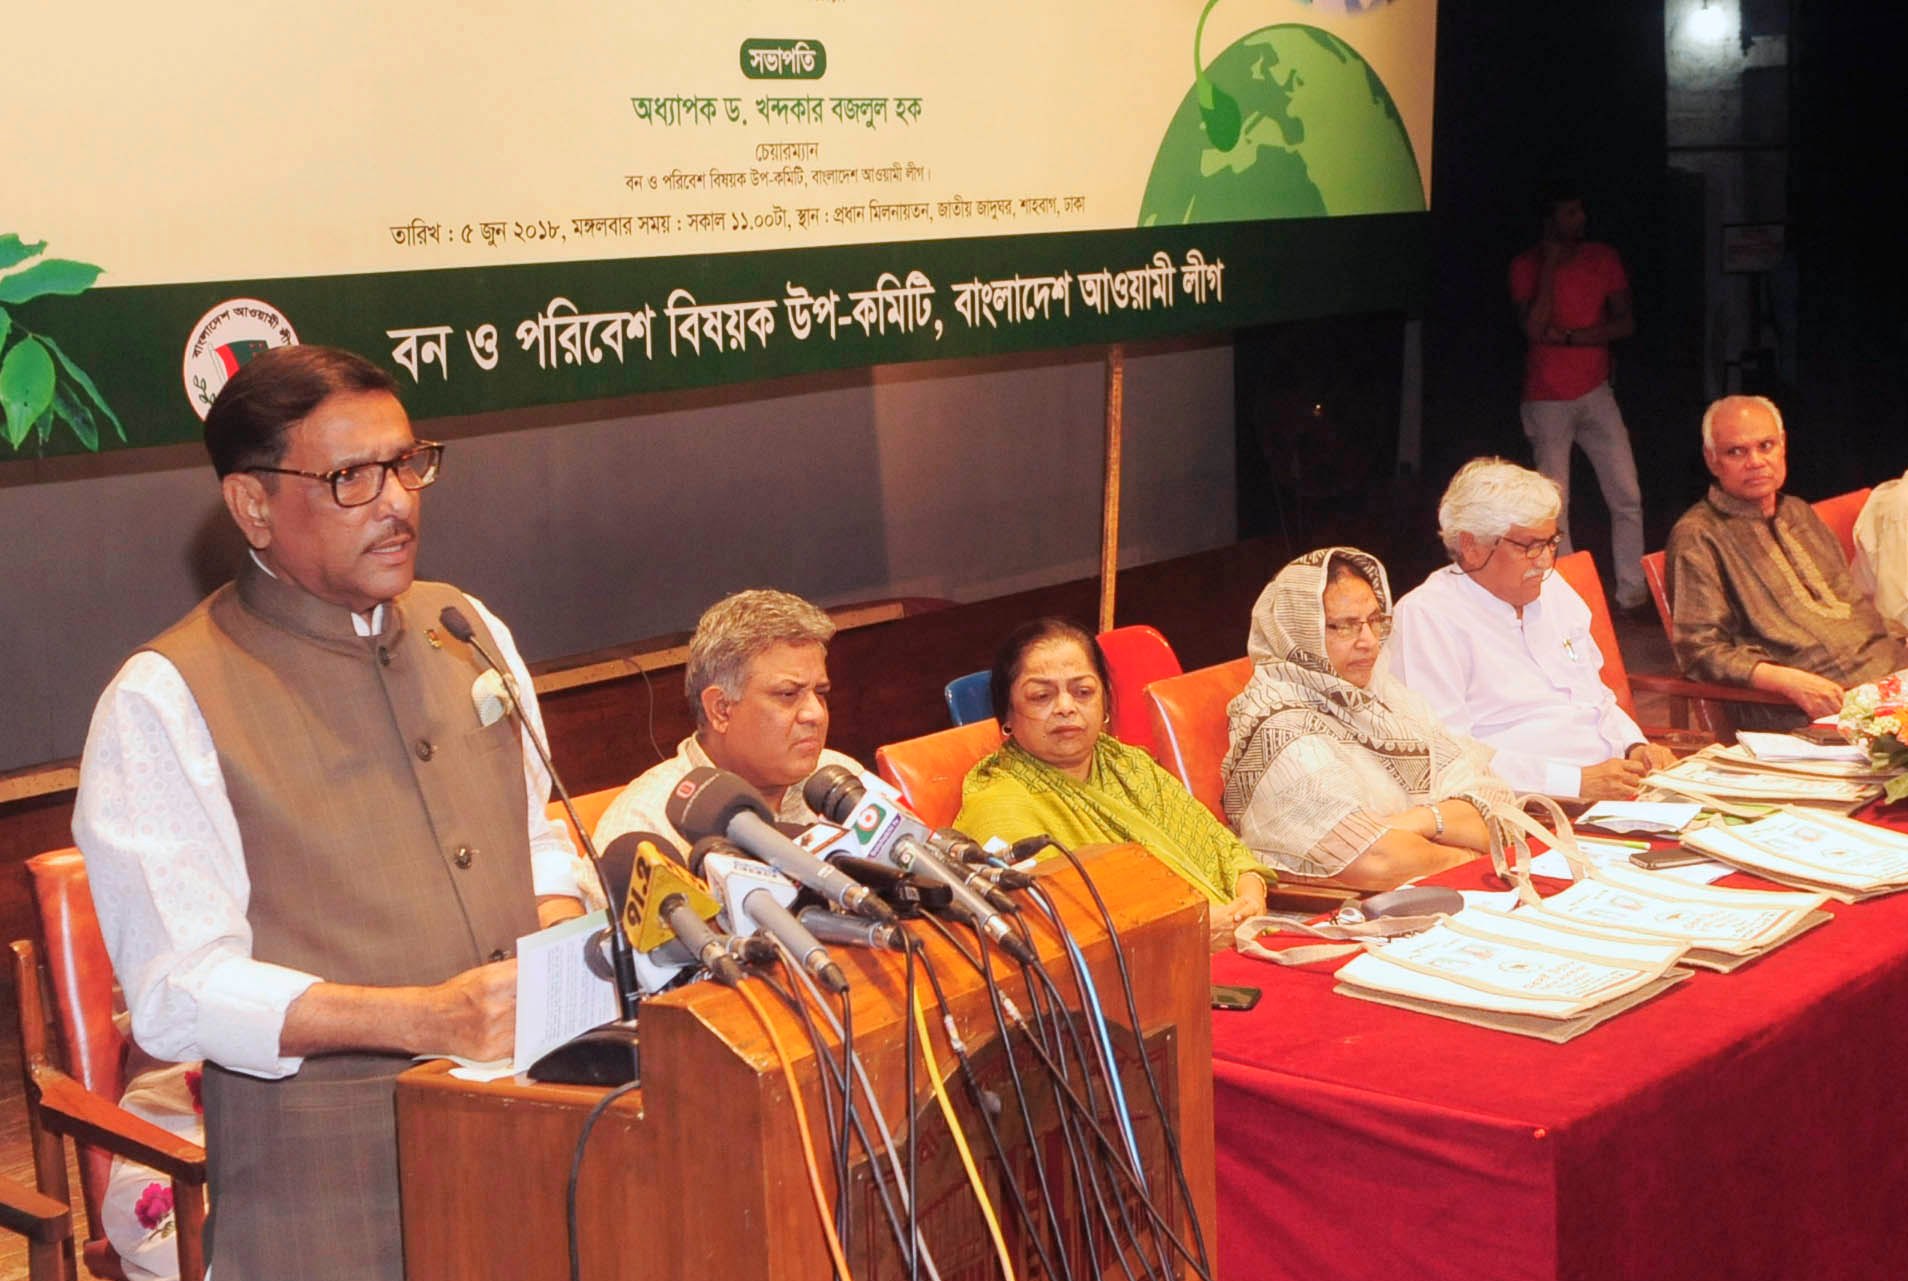 People addicted in BNP will also be found: Minister